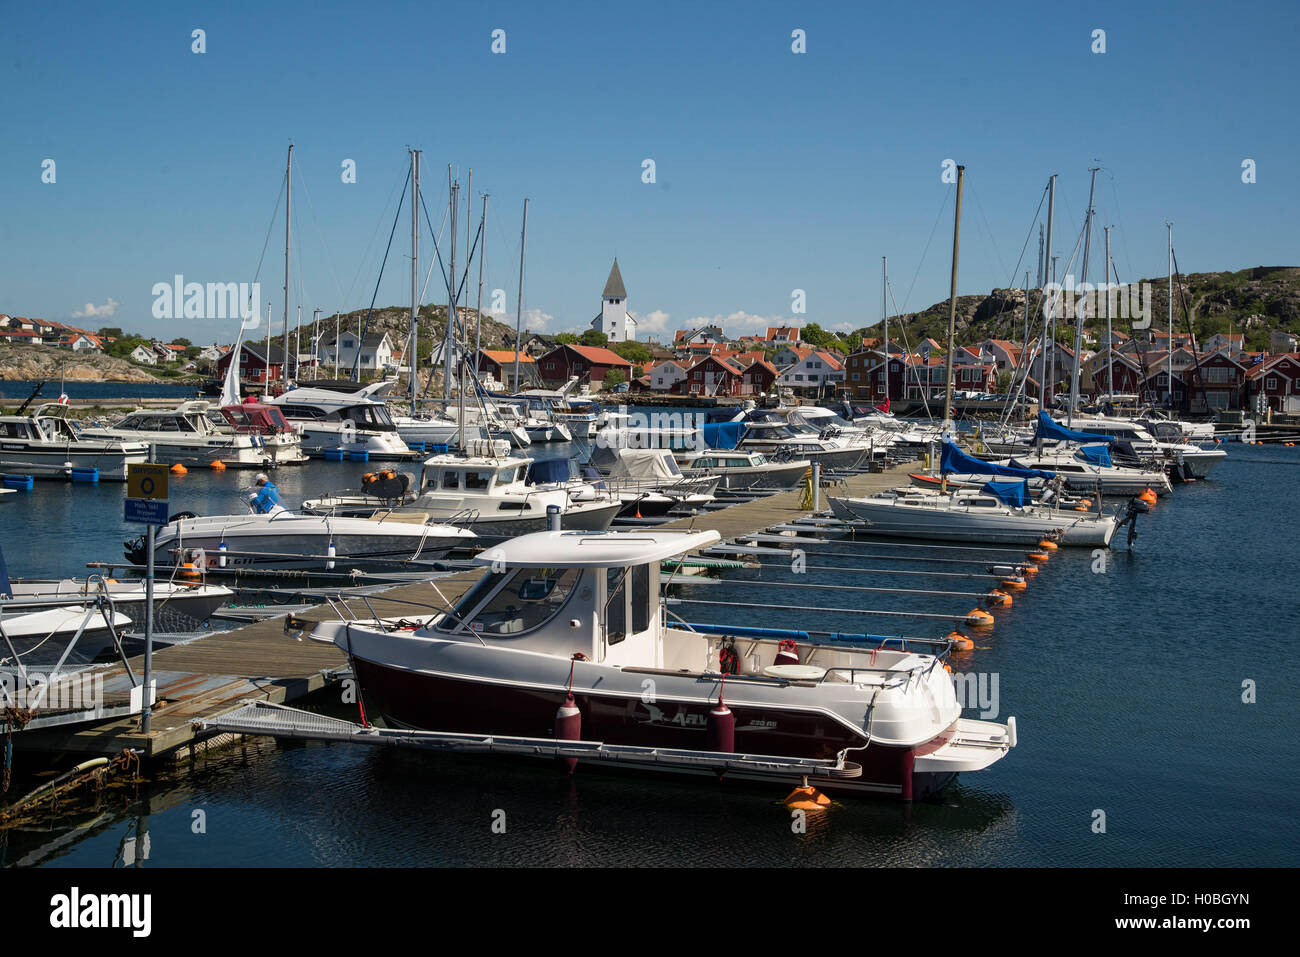 The harbor of Skärhamn on the island of Tjörn on the west coast of Sweden Stock Photo